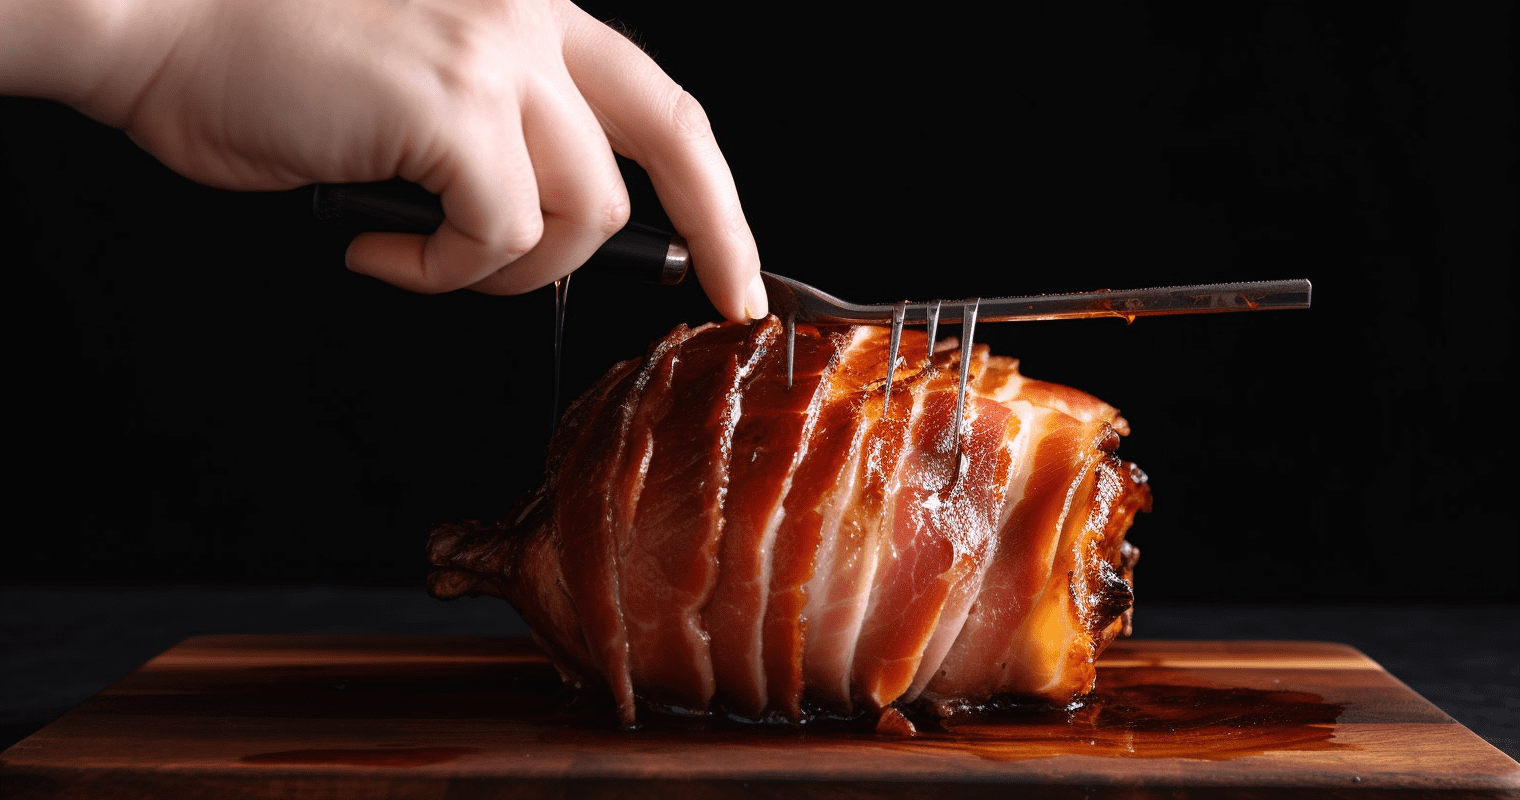 Bacon-Wrapped Turkey Breast Cooking Instructions